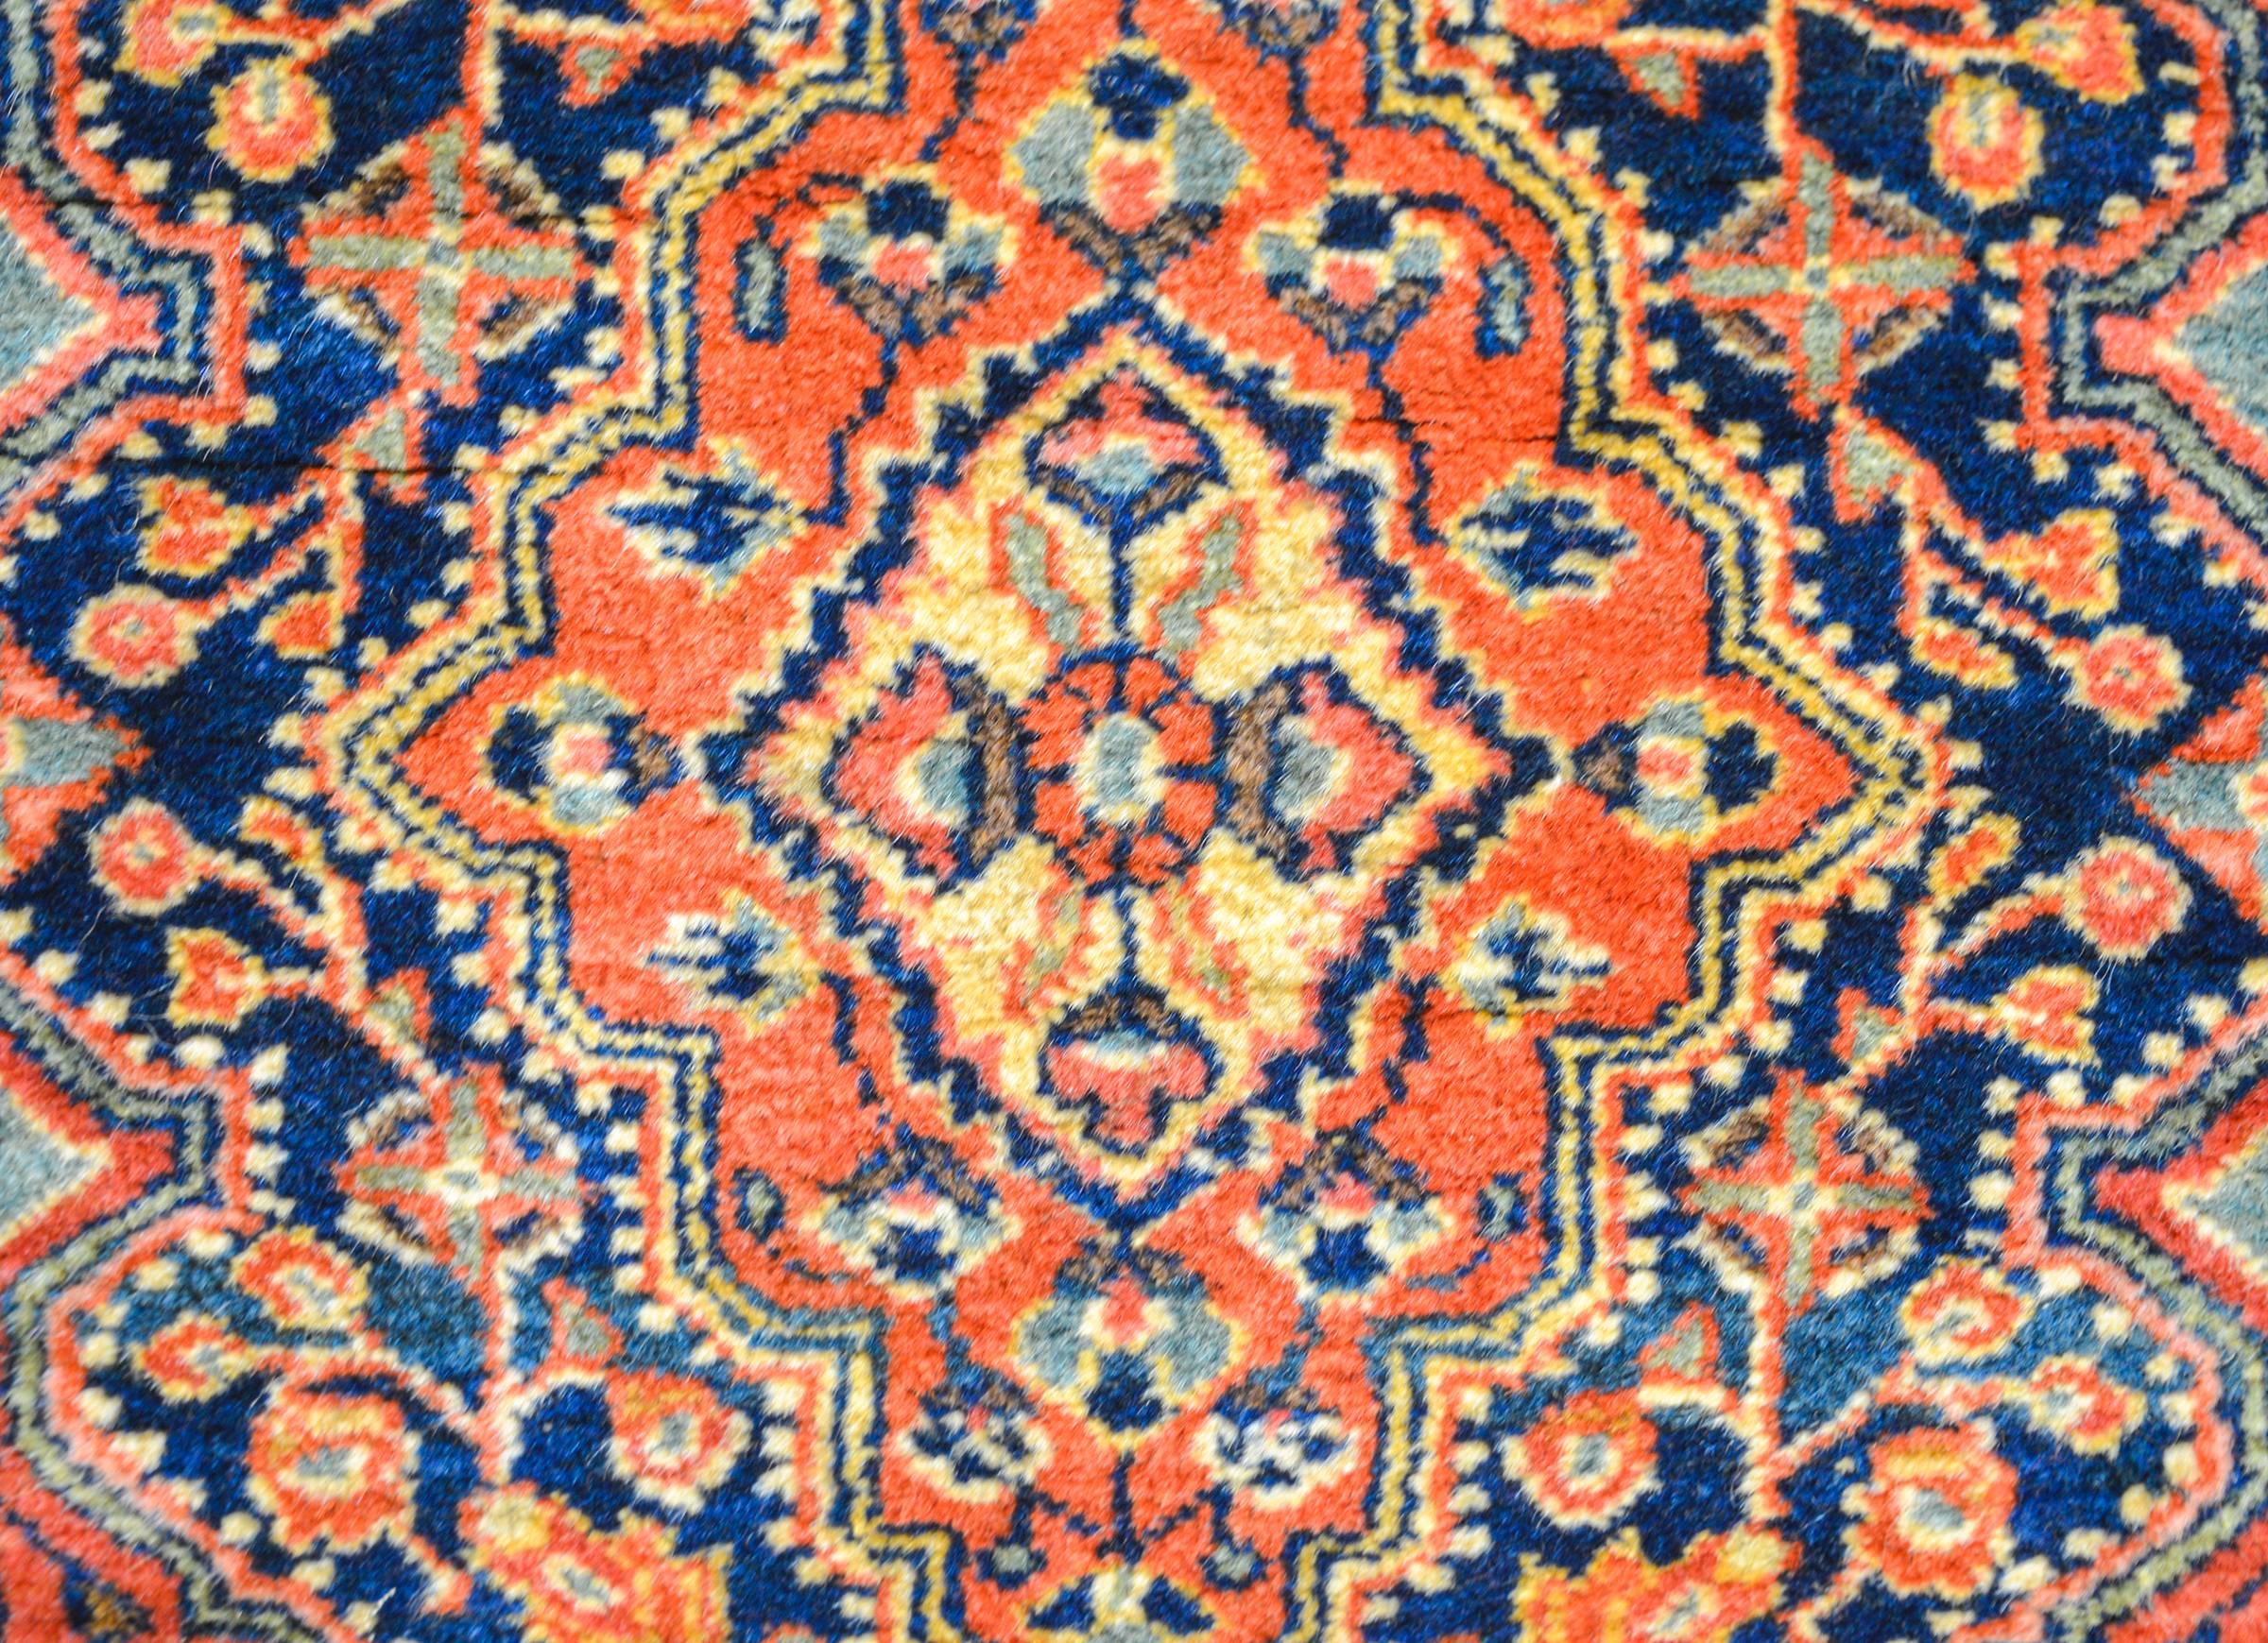 A wonderful early 20th century Persian Jozan Rug with beautiful floral and vine pattern woven in orange, cream, and green vegetable dyed wool, on a dark indigo background. The central medallion is complementary with a floral pattern. The border is